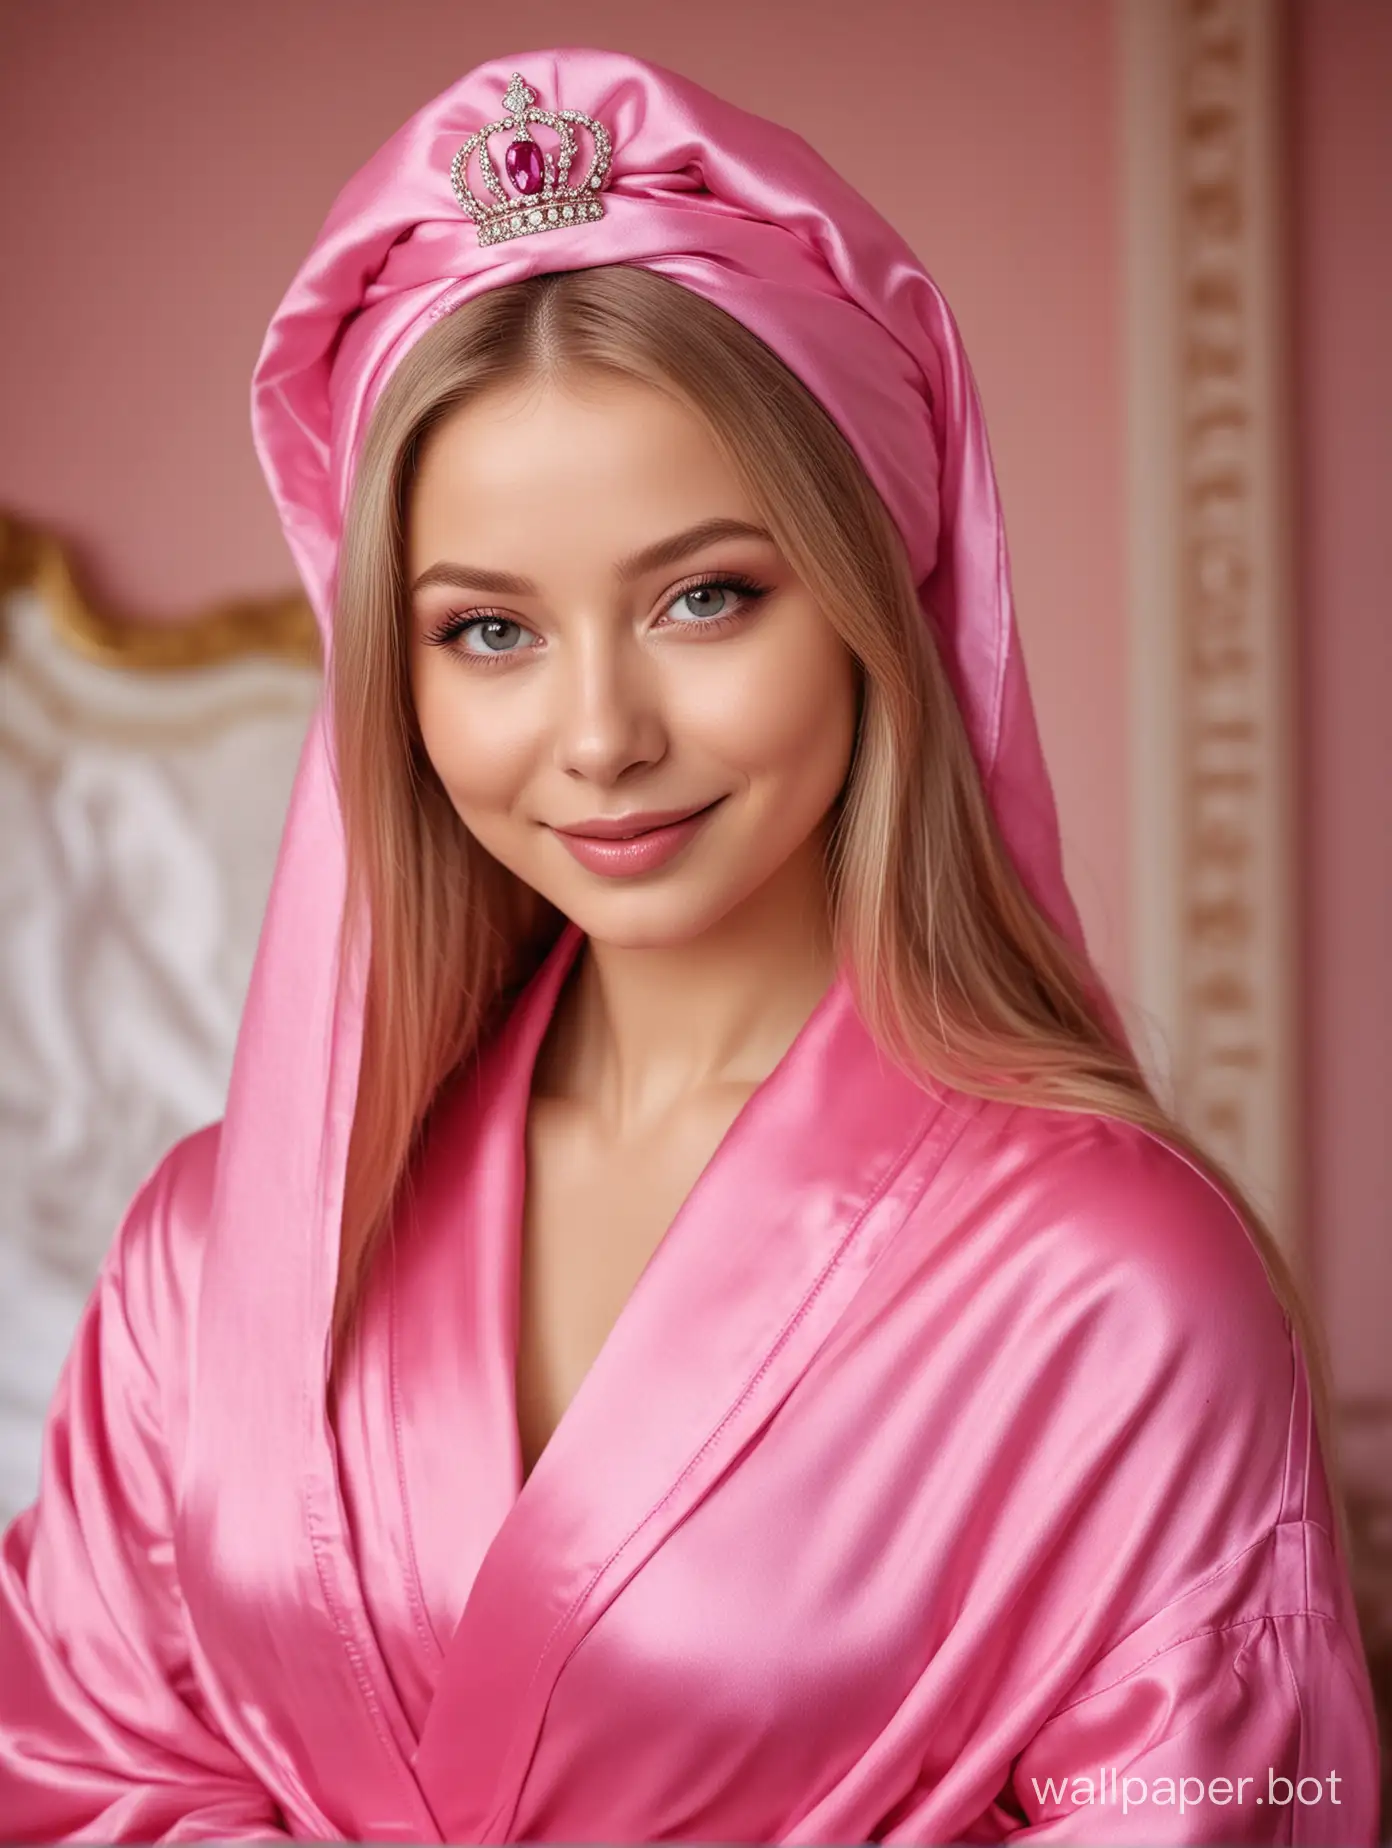 Glamorous-Portrait-of-Young-Queen-Yulia-Lipnitskaya-in-Pink-Silk-Robe-and-Crown